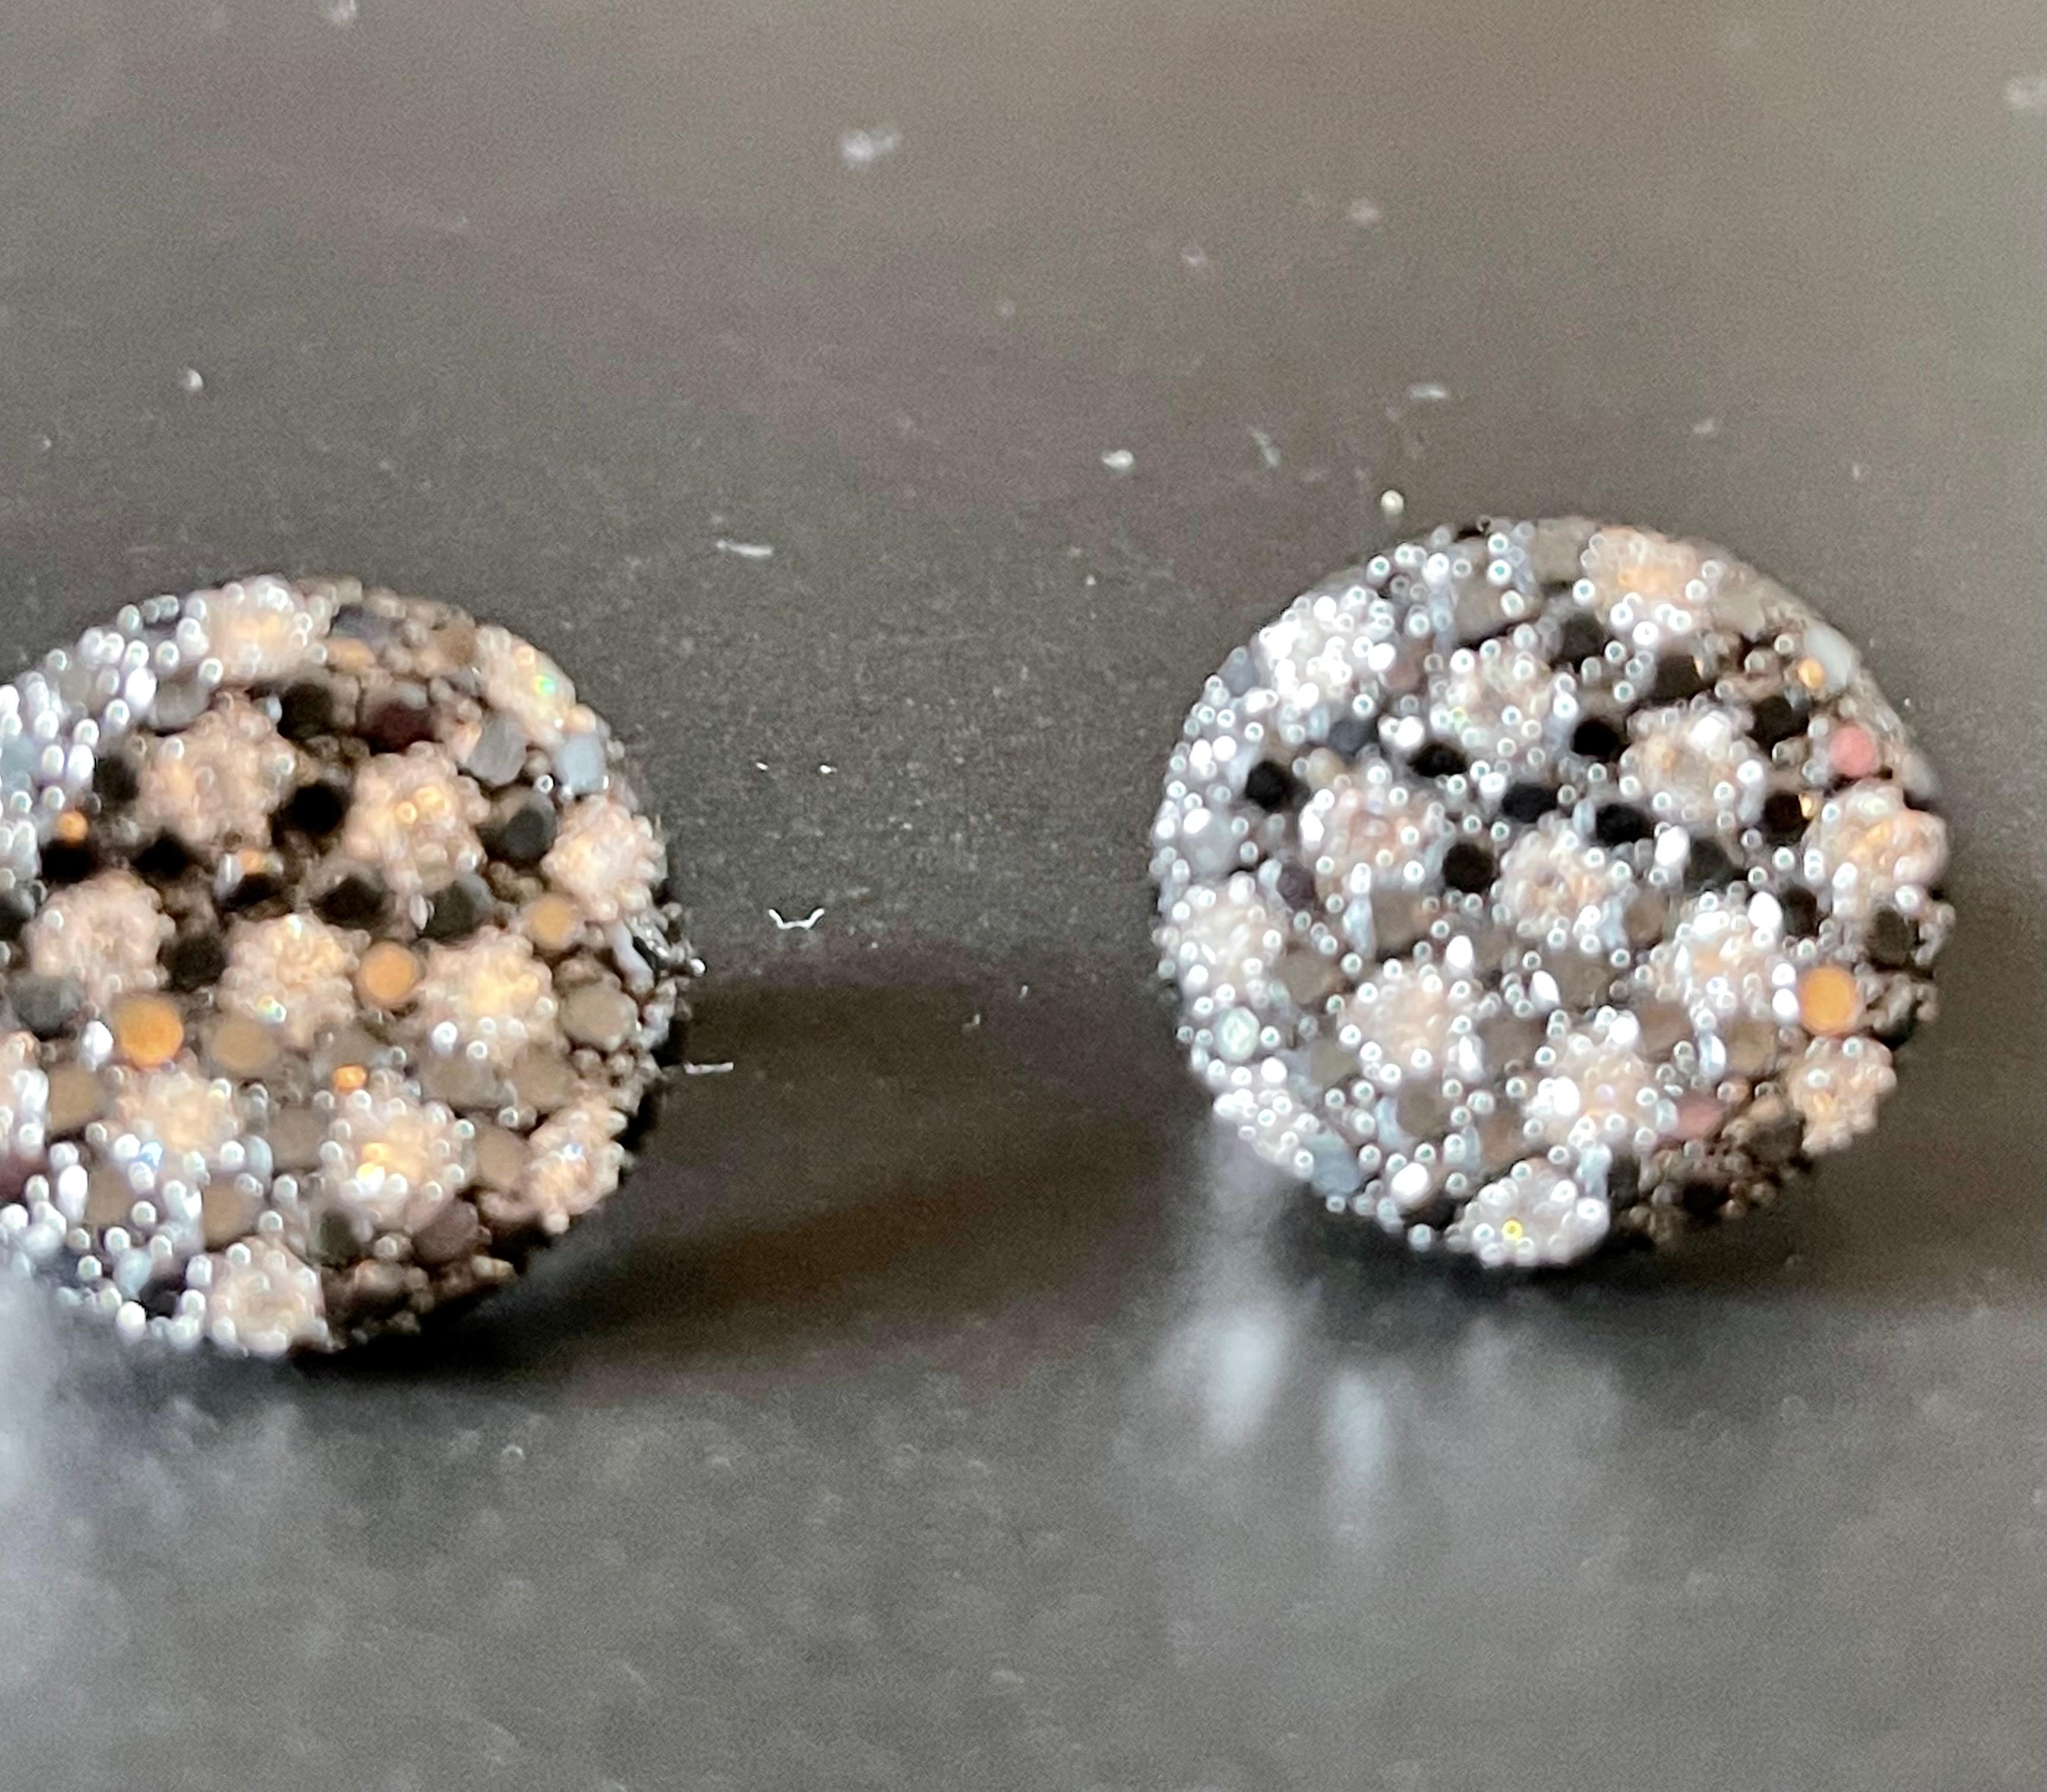 Unusual 18 K white Gold omega clip post earrings, slightly concave shape and pave set with 28 white brilliant cut Diamonds weighing 0.83 ct, G color, vs clarity and 162 brilliant cut black Diamonds with a total weight of 3.89 ct. 
The color